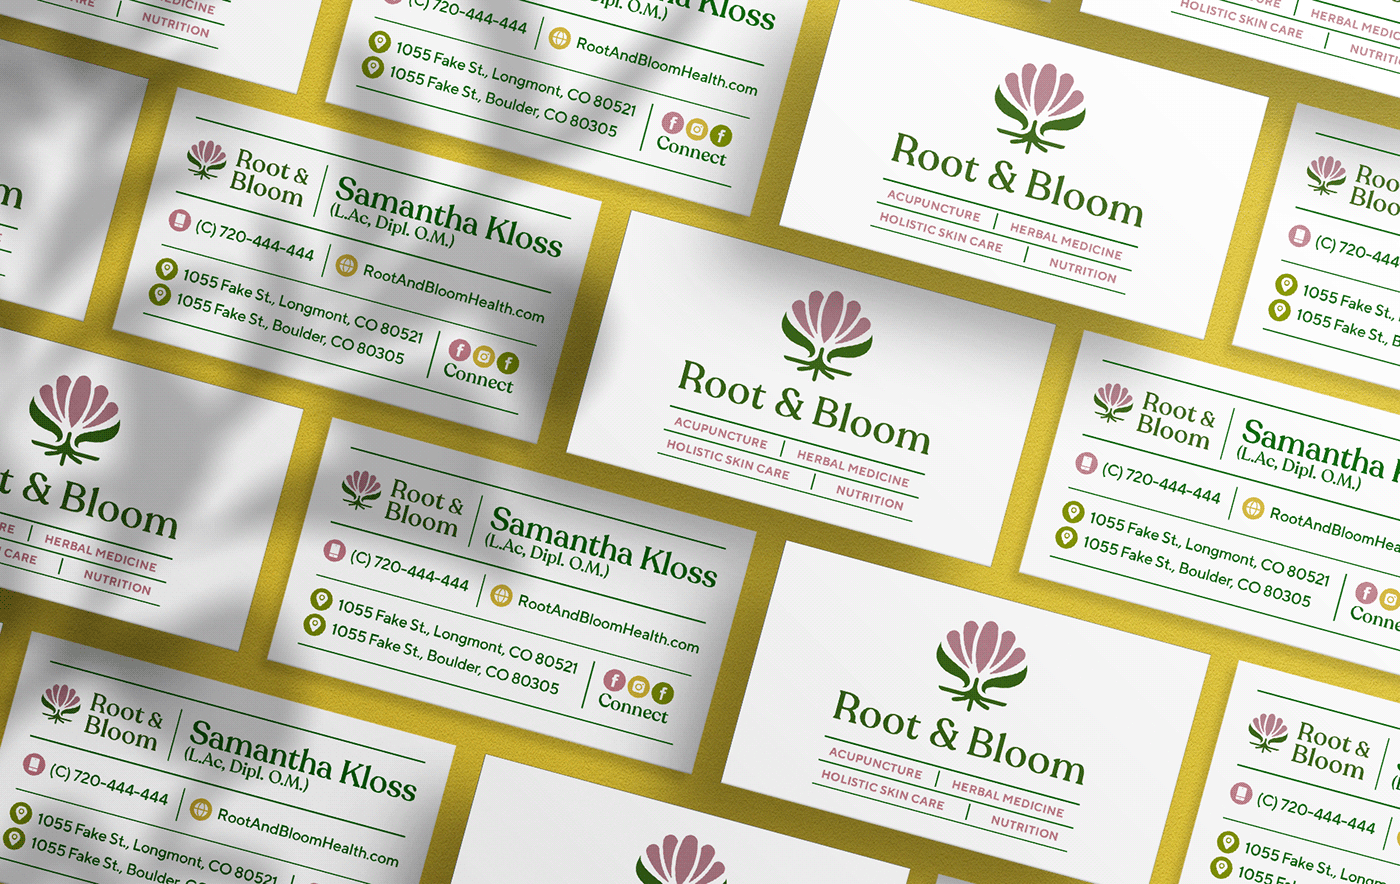 Root & Bloom business cards